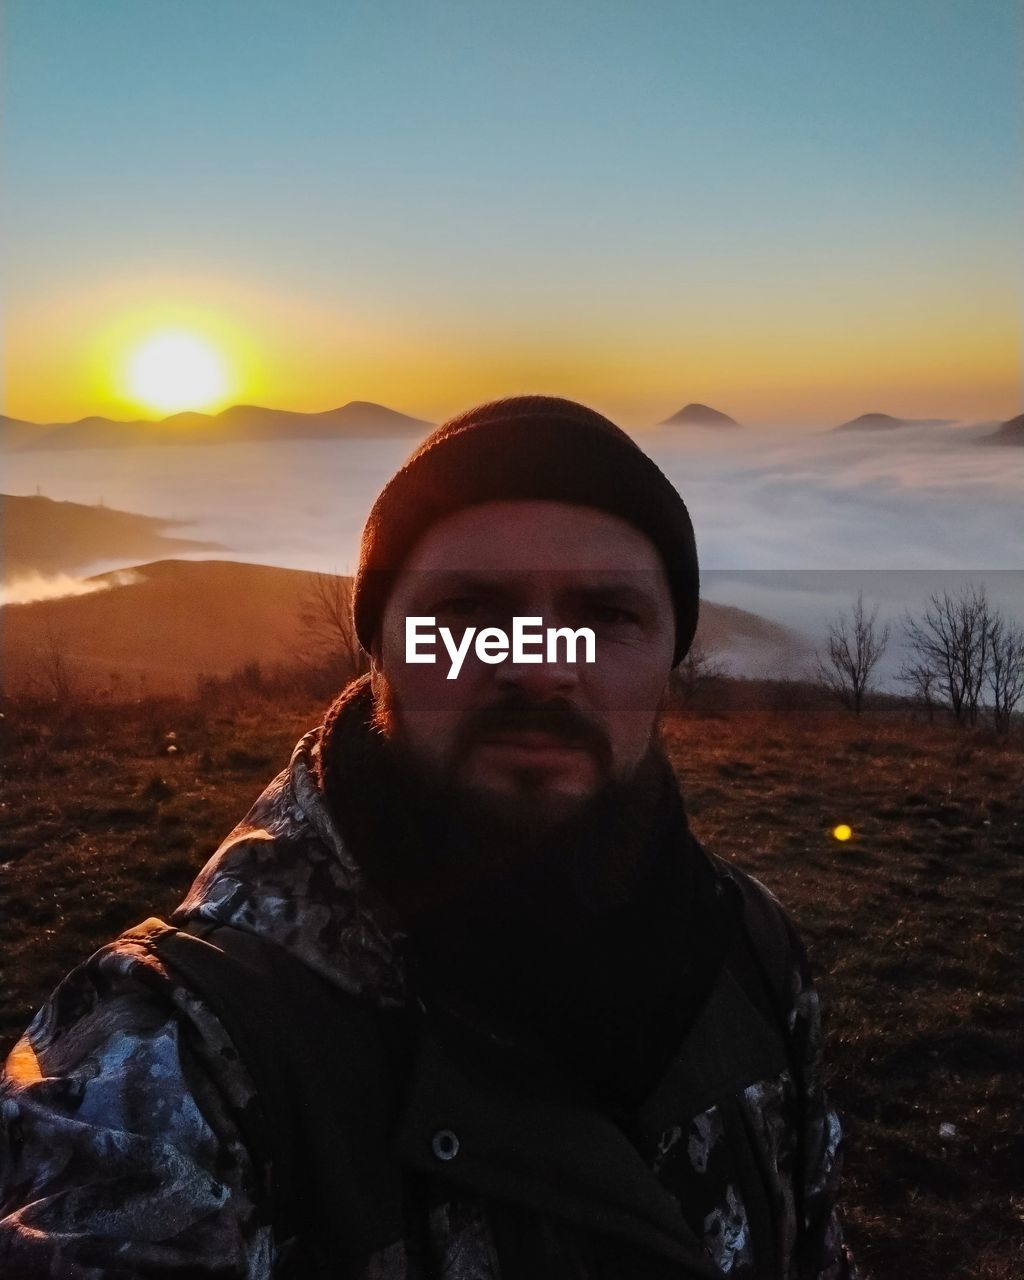 sky, one person, sunset, portrait, adult, nature, mountain, men, clothing, looking at camera, beauty in nature, leisure activity, scenics - nature, front view, landscape, sunlight, land, environment, sun, young adult, standing, facial hair, lifestyles, beard, non-urban scene, winter, outdoors, mountain range, orange color, evening, tranquility, hat, tranquil scene, jacket, travel, adventure, cold temperature, dusk, headshot, cloud, travel destinations, hiking, back lit, activity, copy space